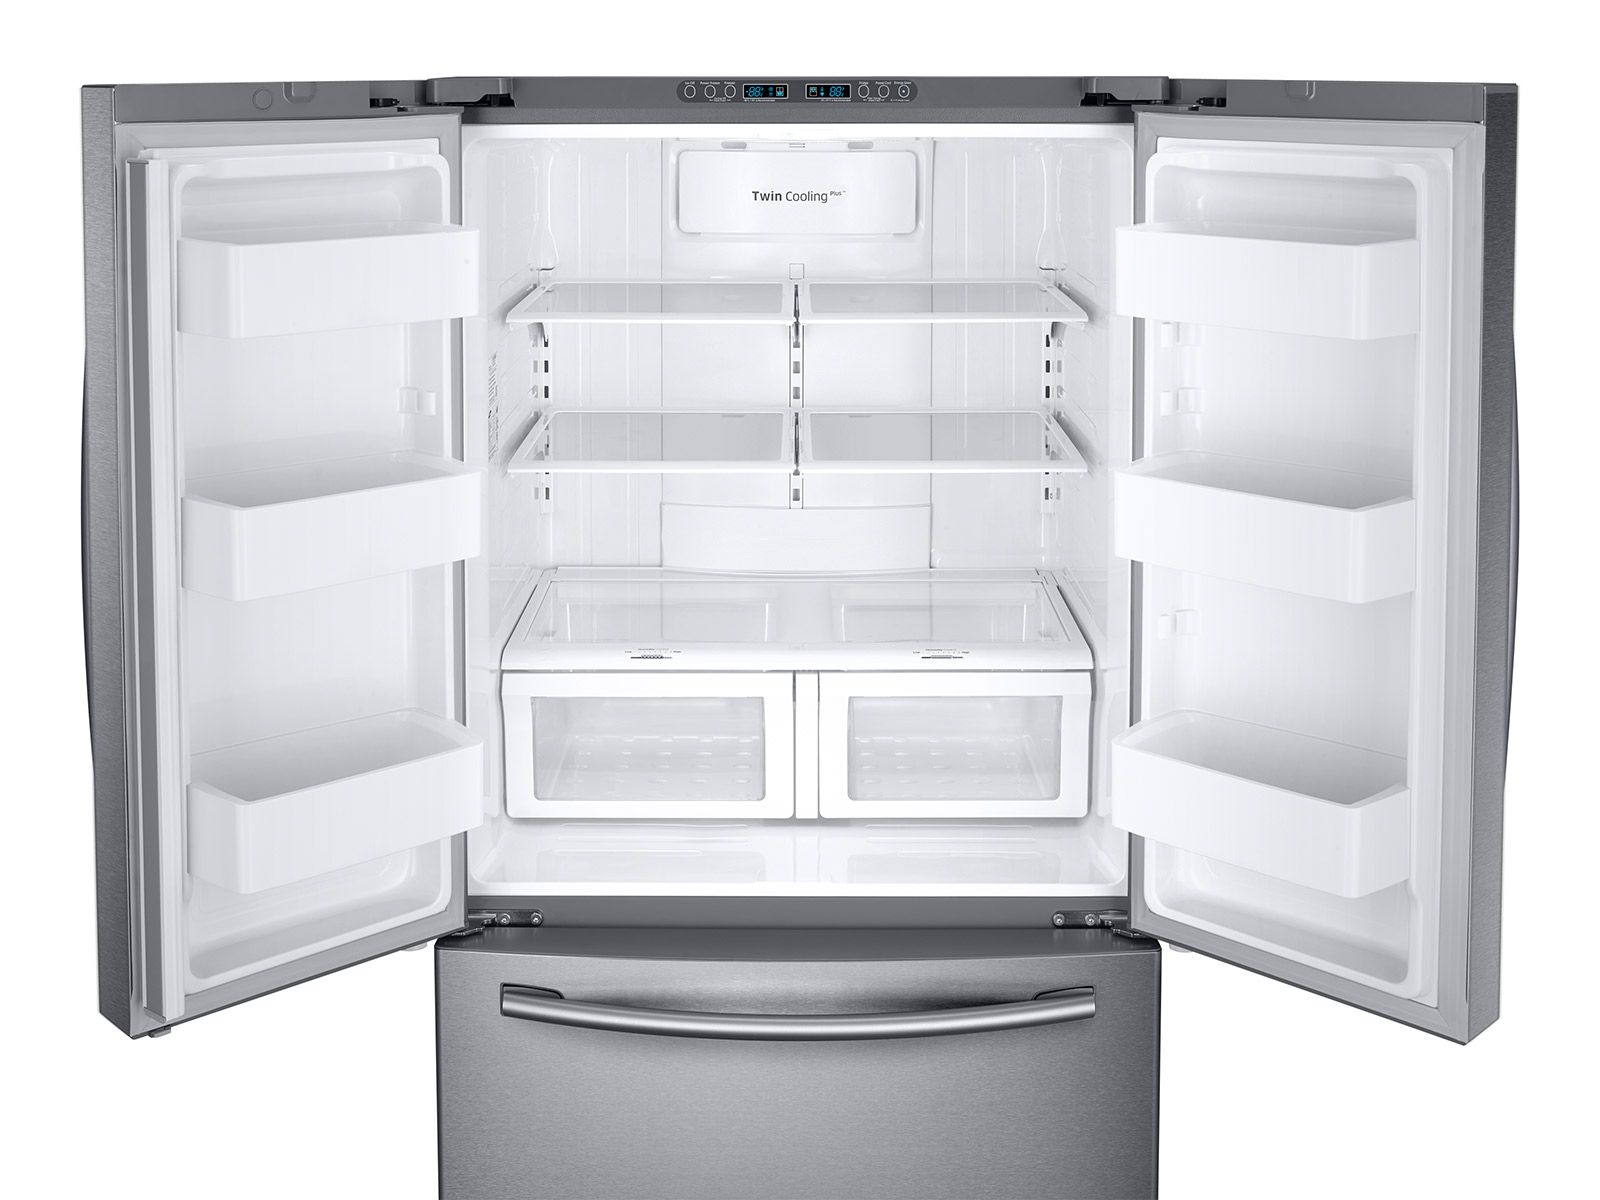 26 cu. ft. French Door Refrigerator with Twin Cooling Plus™ in Stainless  Steel Refrigerator - RF26HFENDSR/AA | Samsung US